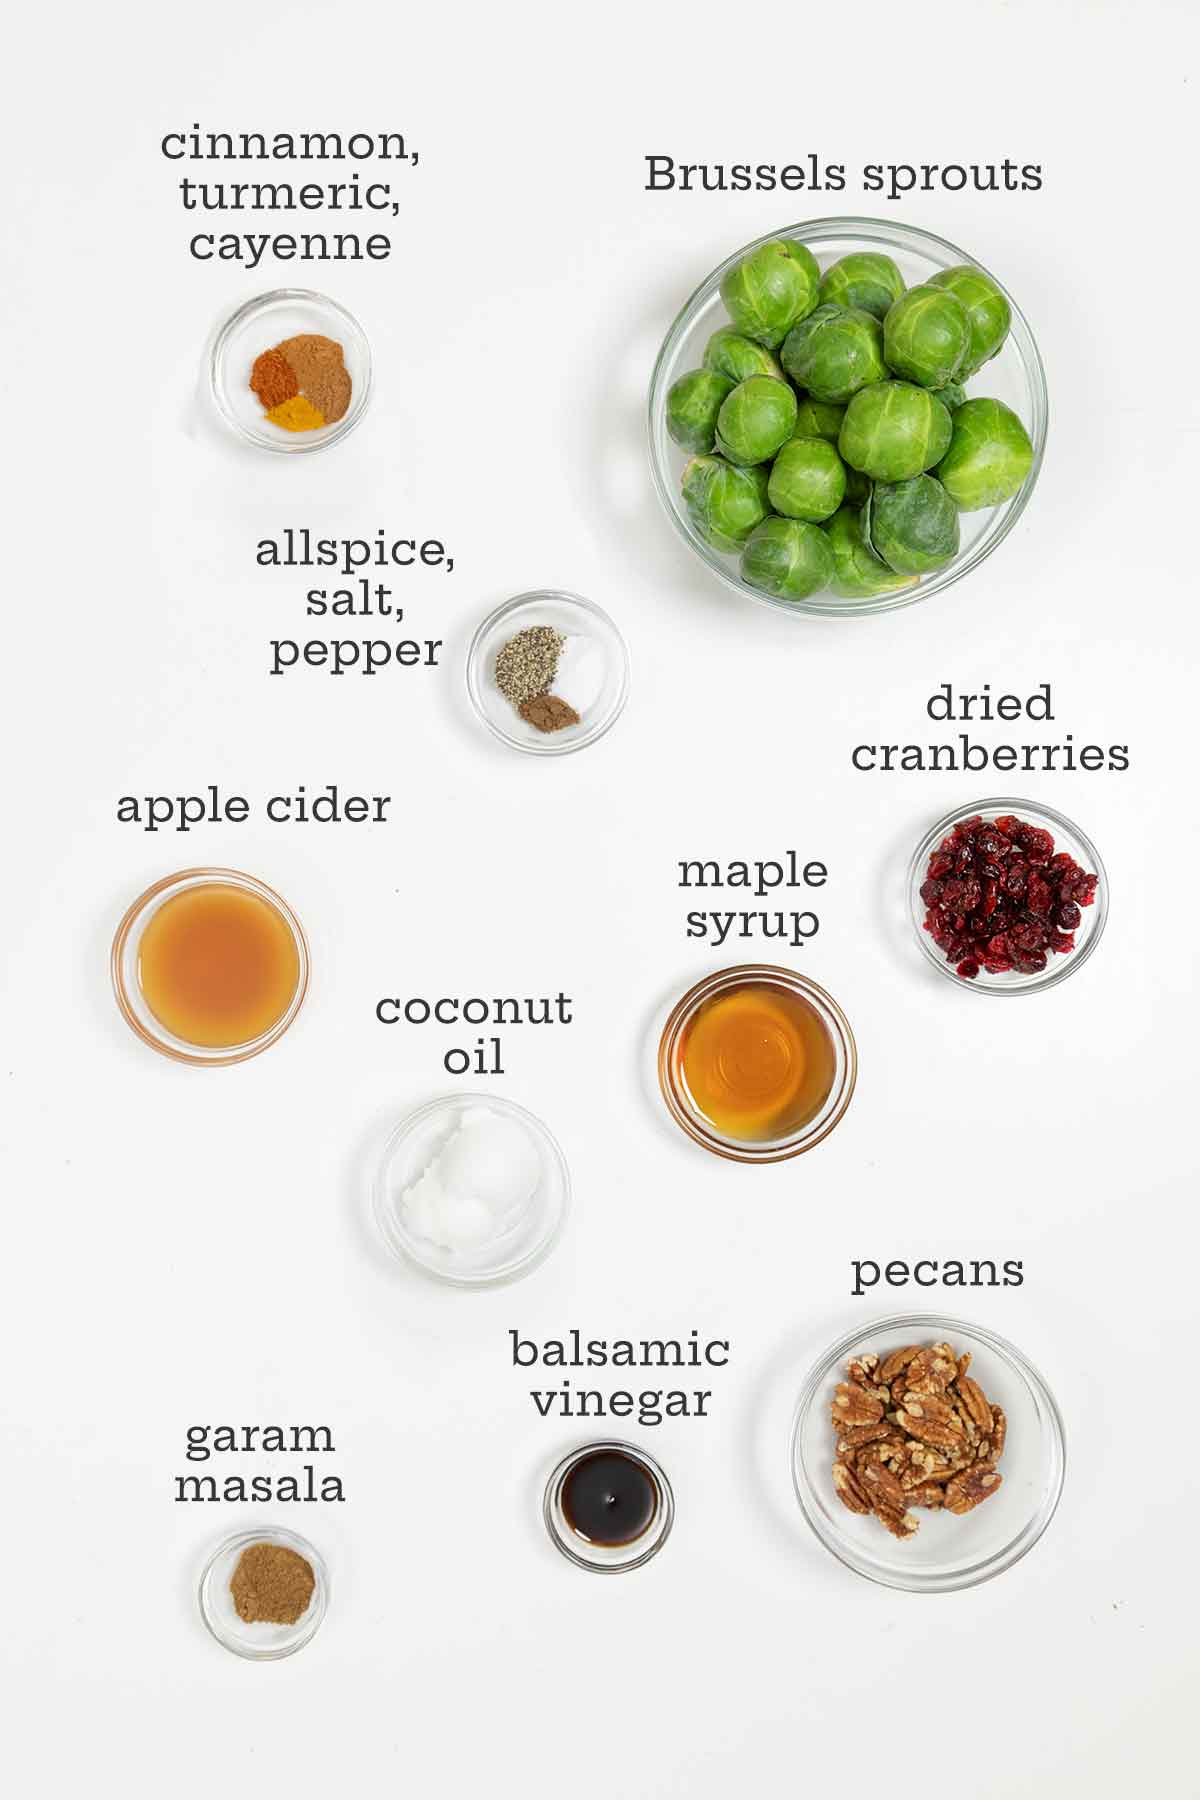 Ingredients for spicy roasted Brussels sprouts--sprouts, spices, apple cider, coconut oil, nuts, dried cranberries.